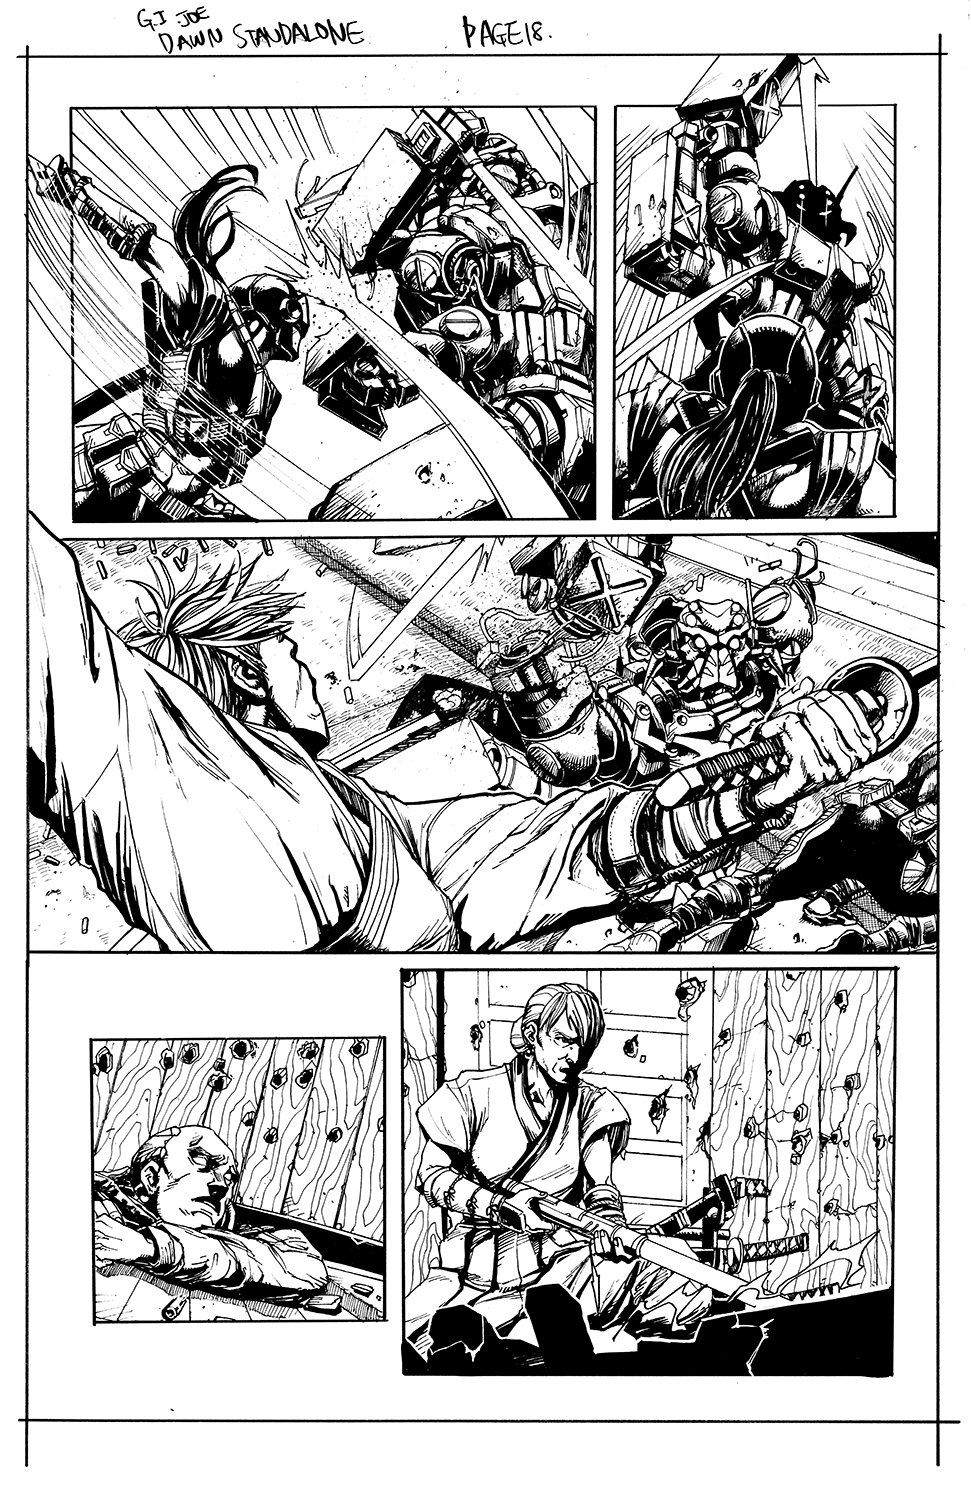 G.I. Joe: A Real American Hero Yearbook 2019 page 18